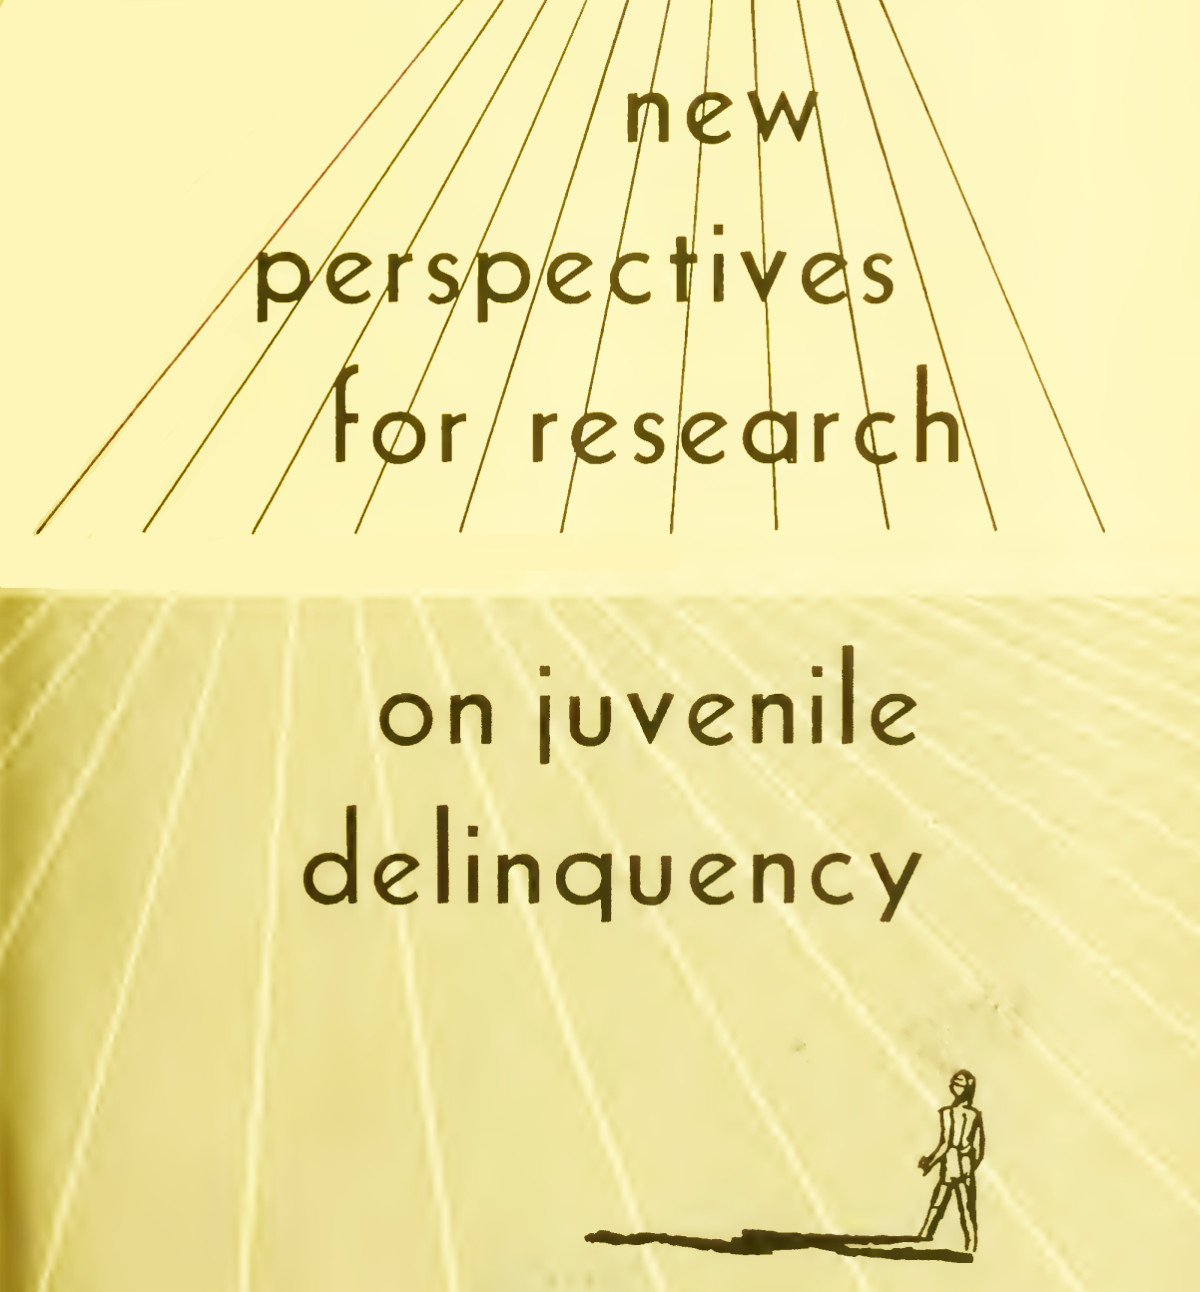 New perspectives on juvenile delinquency